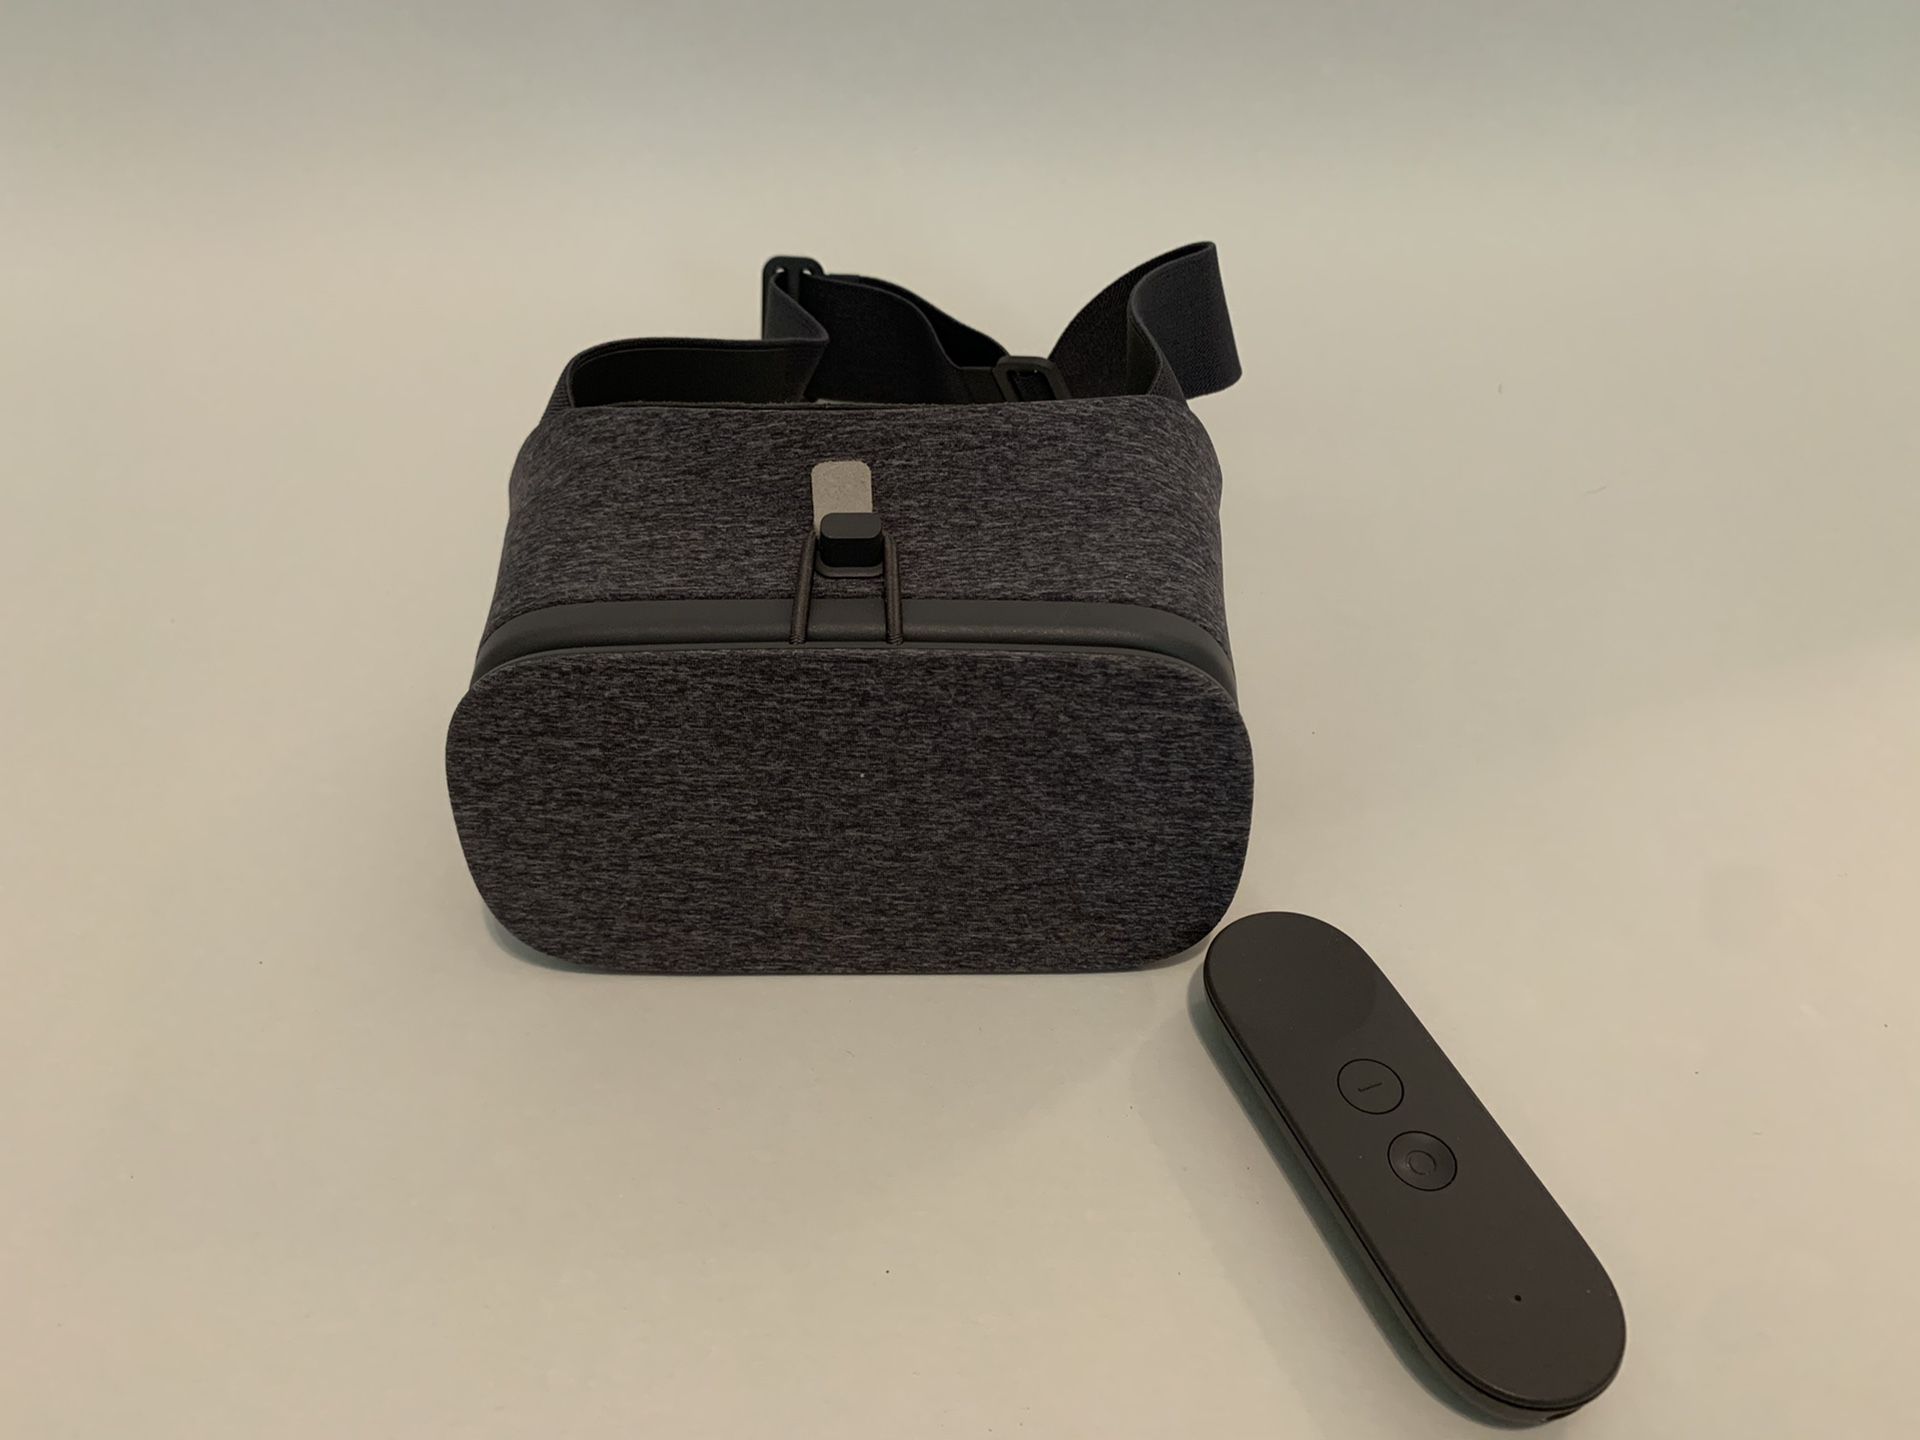 Google Daydream with controller